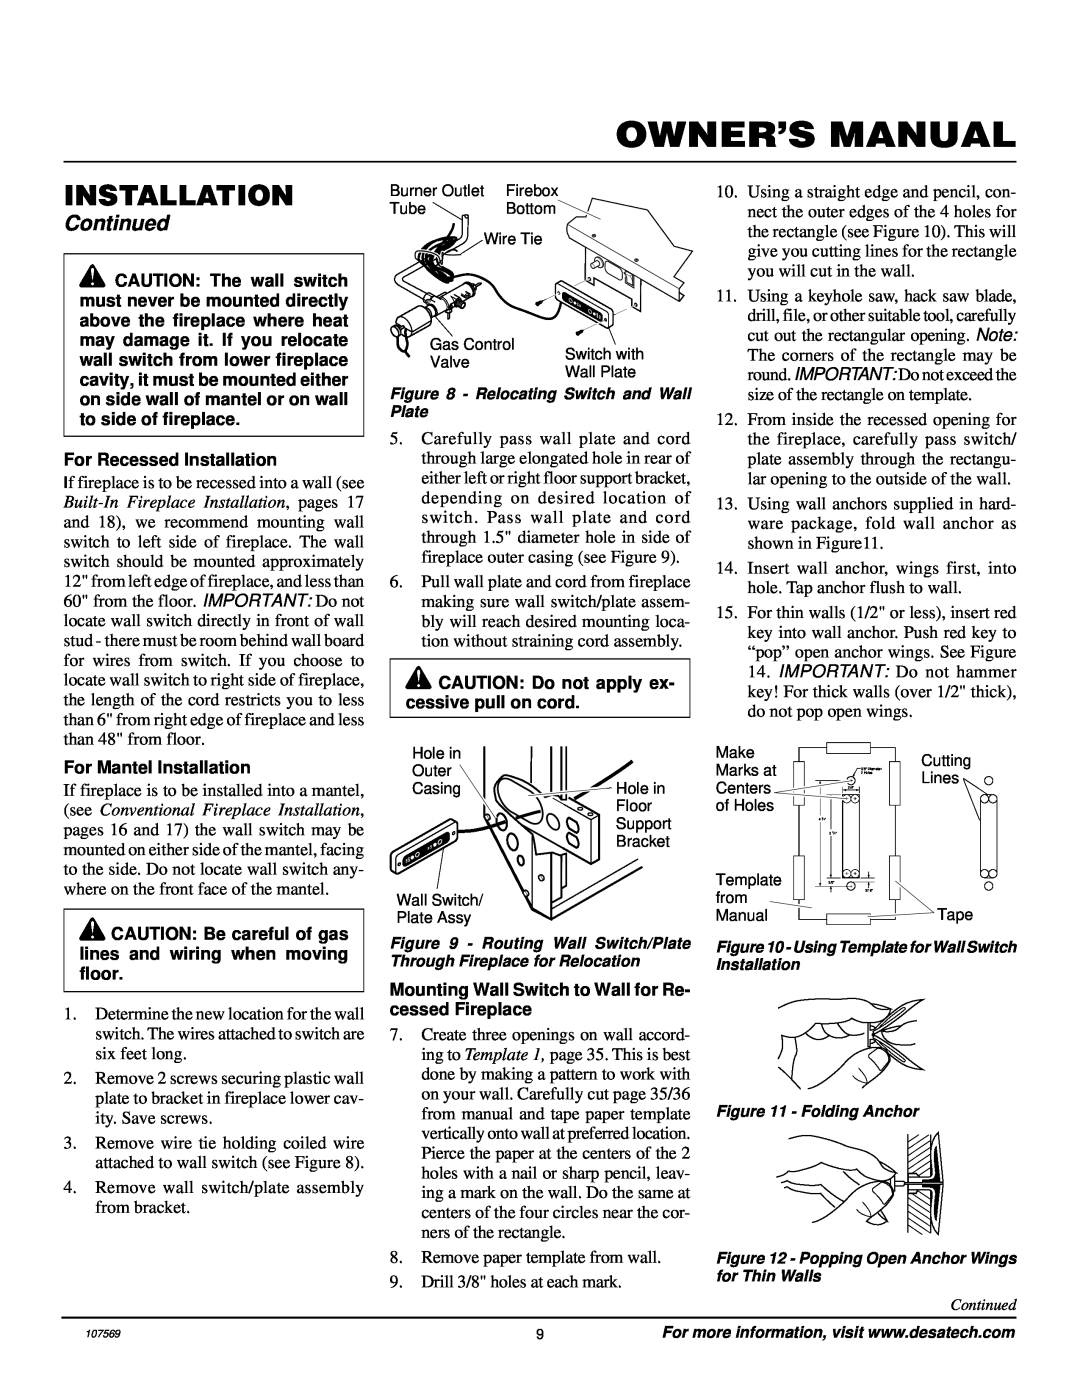 Desa CGEFP33NR installation manual Continued, For Recessed Installation, CAUTION Do not apply ex- cessive pull on cord 